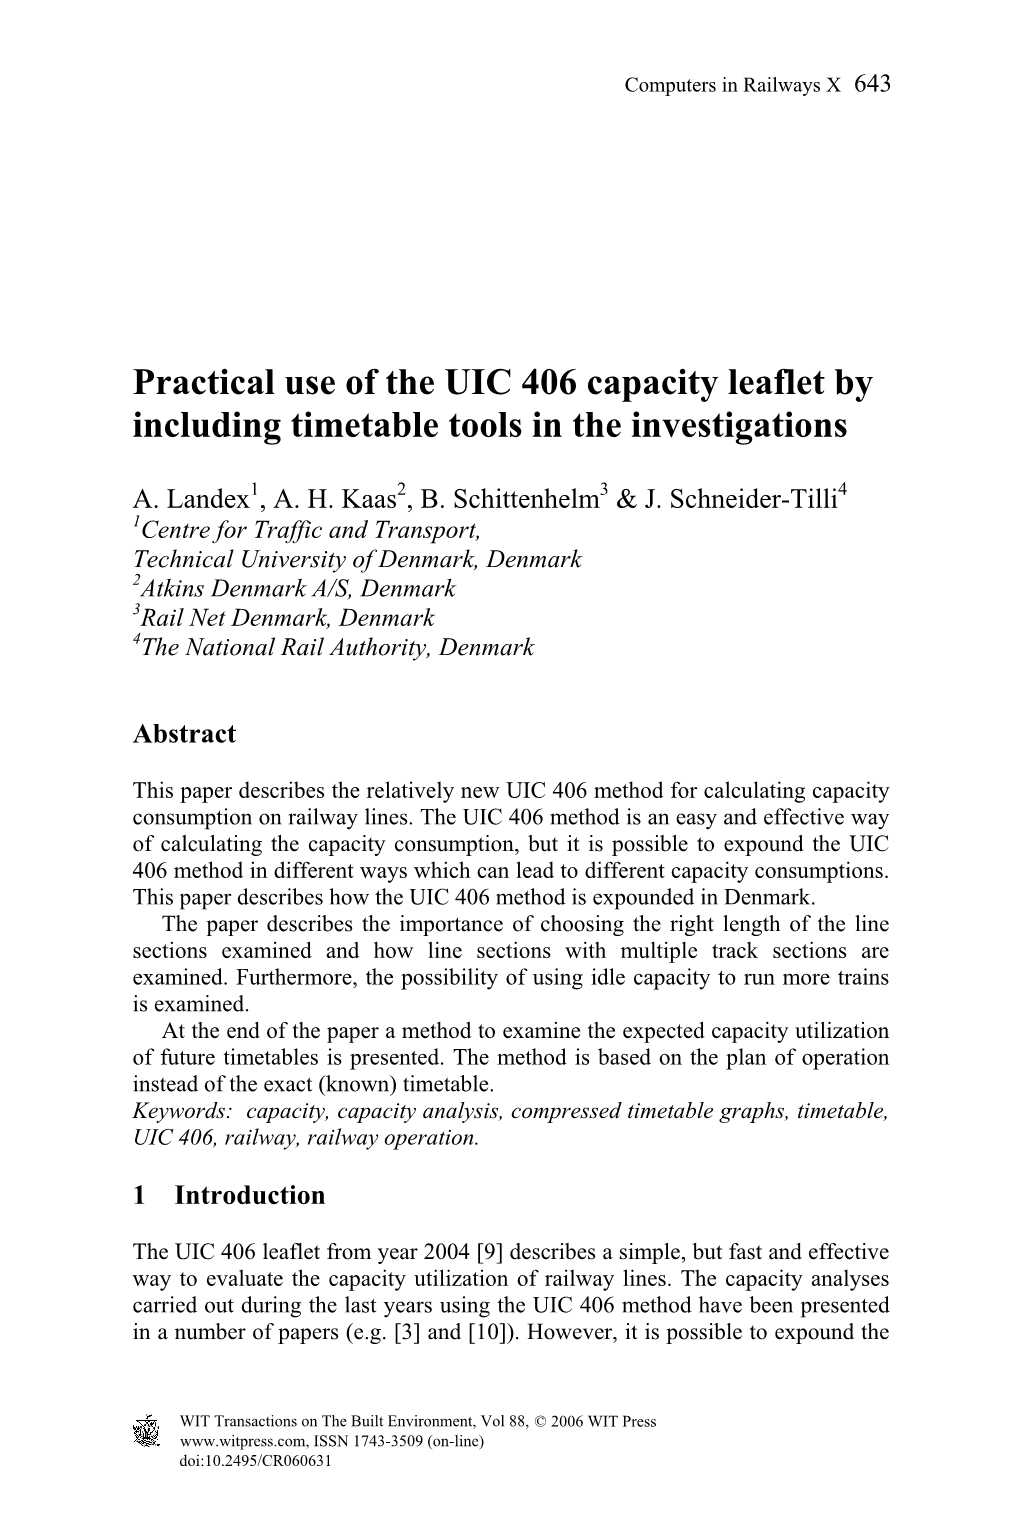 Practical Use of the UIC 406 Capacity Leaflet by Including Timetable Tools in the Investigations